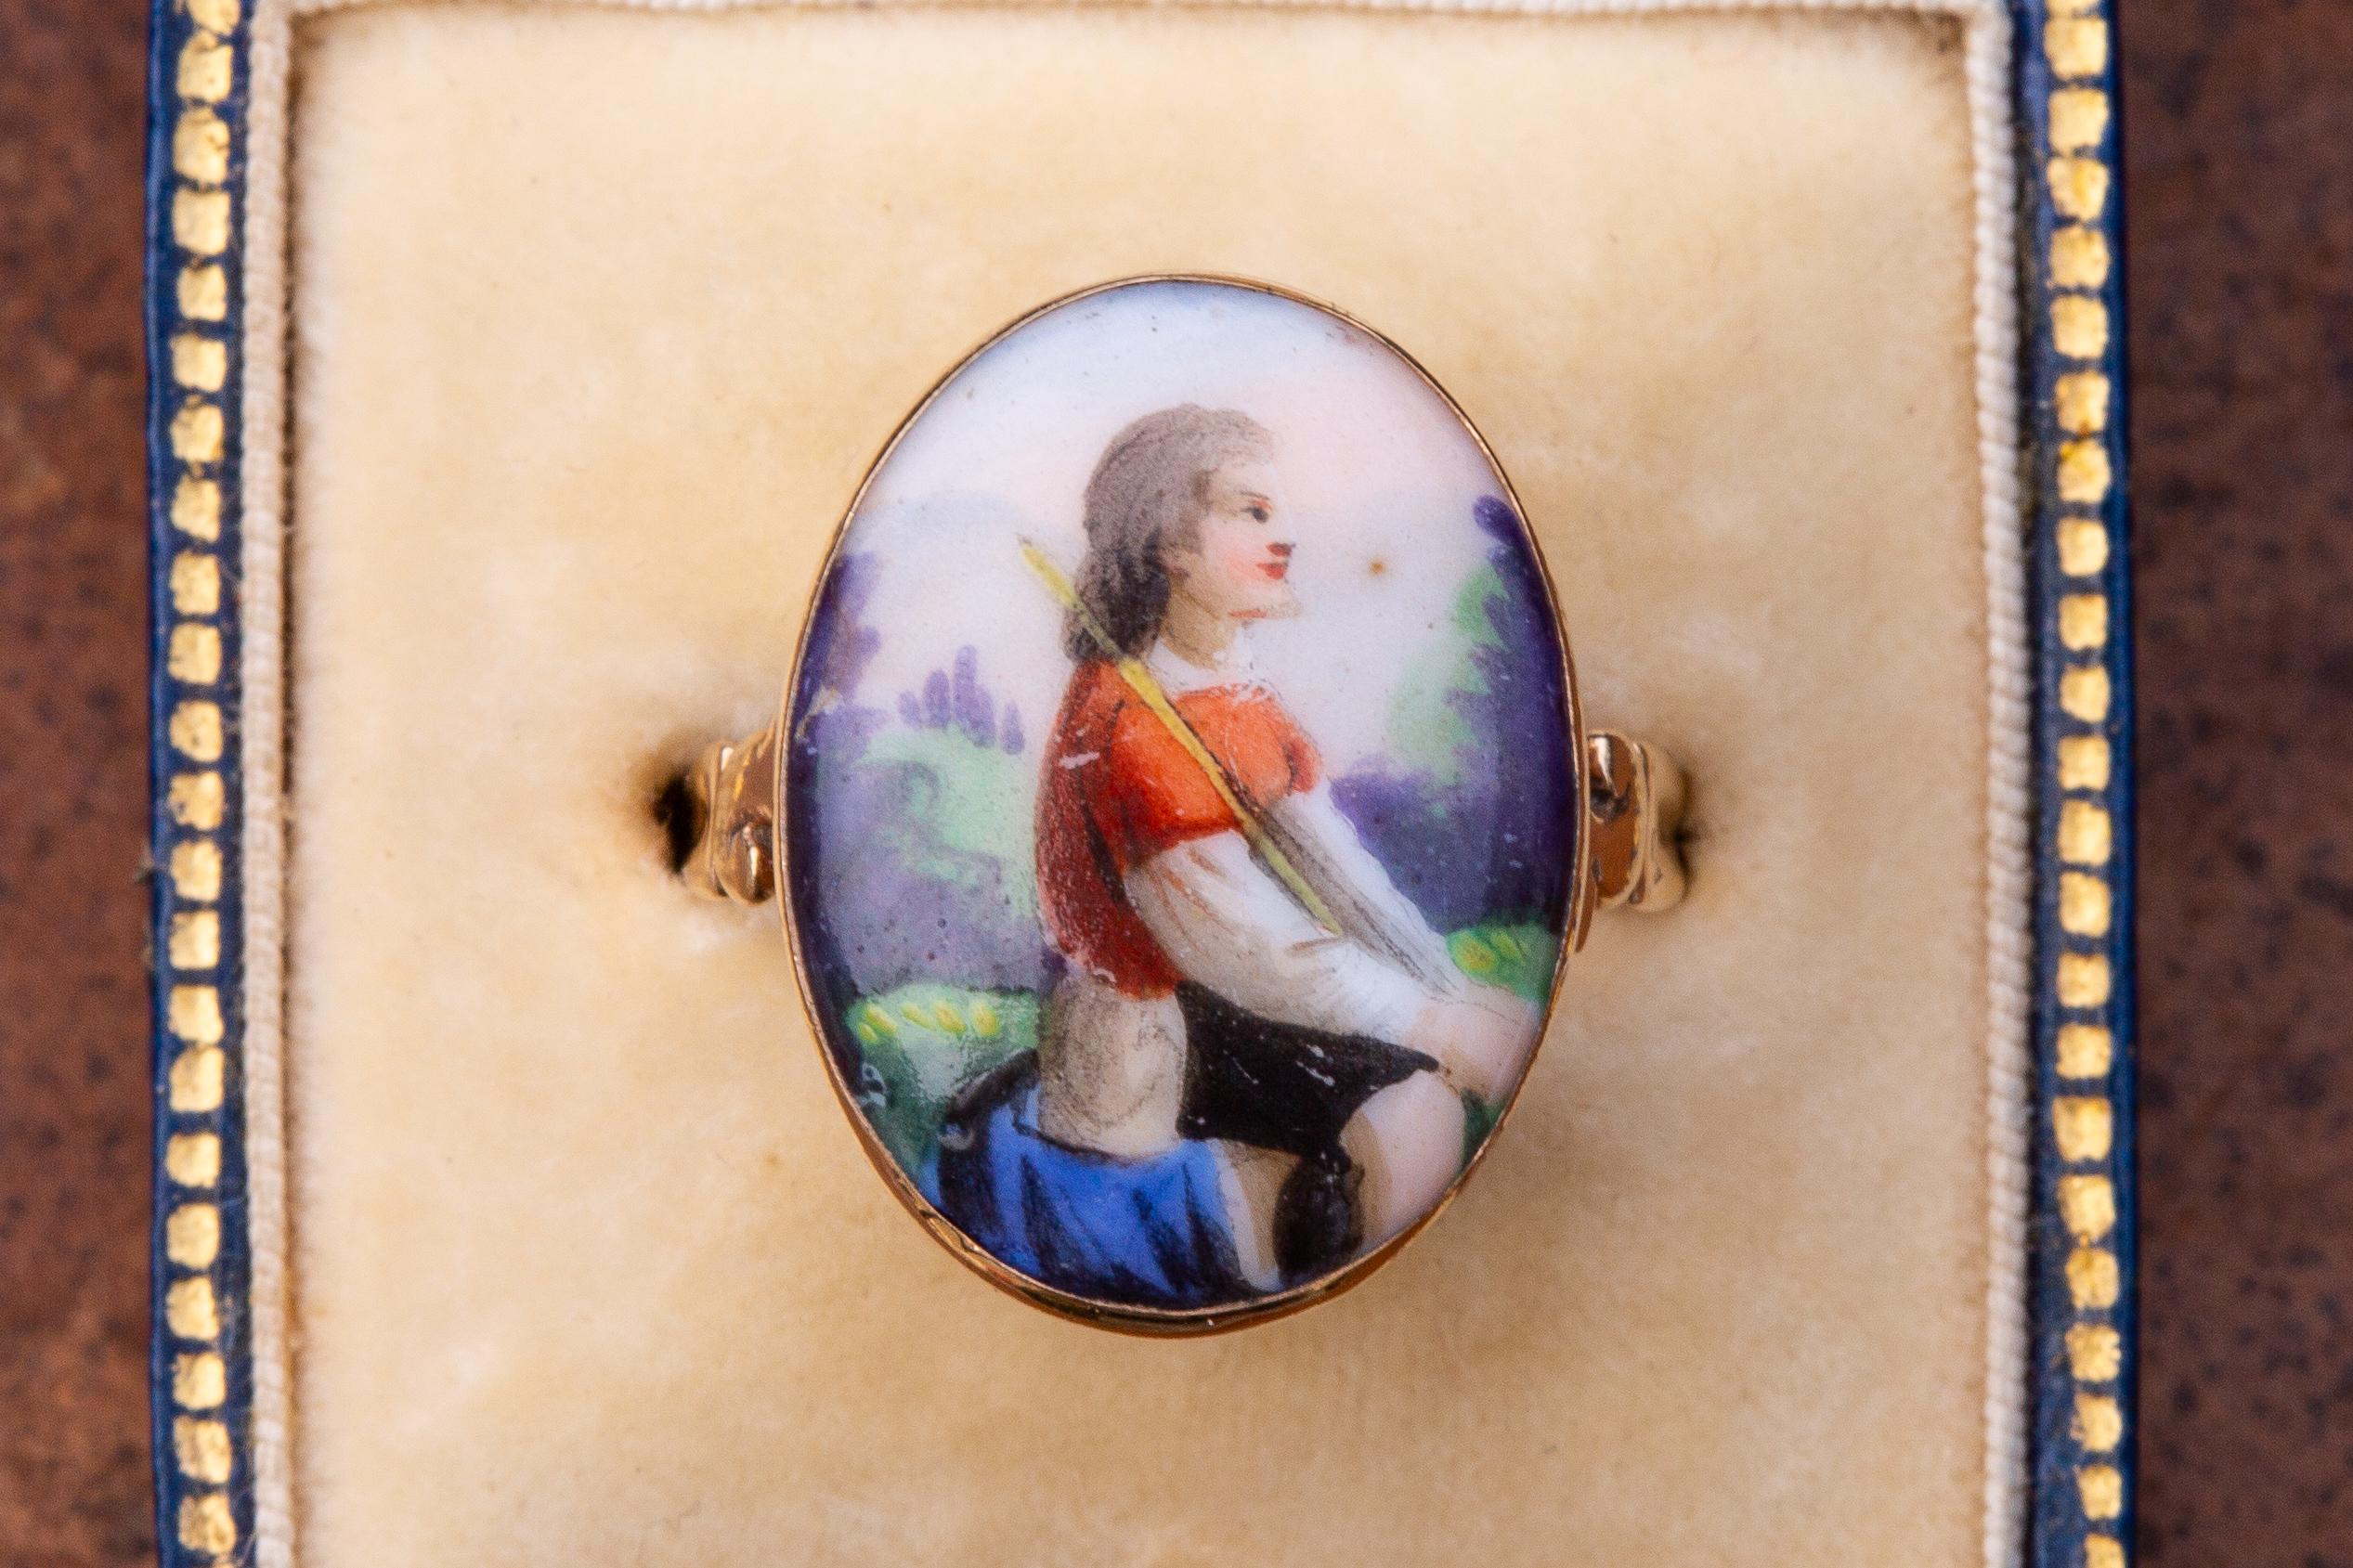 This rare antique late 18th century gold ring was made in France and features a painted enamel miniature of a shepherd boy holding a crook. This pastoral scene probably depicts David the Shepherd Boy, who gains fame and becomes a hero by killing